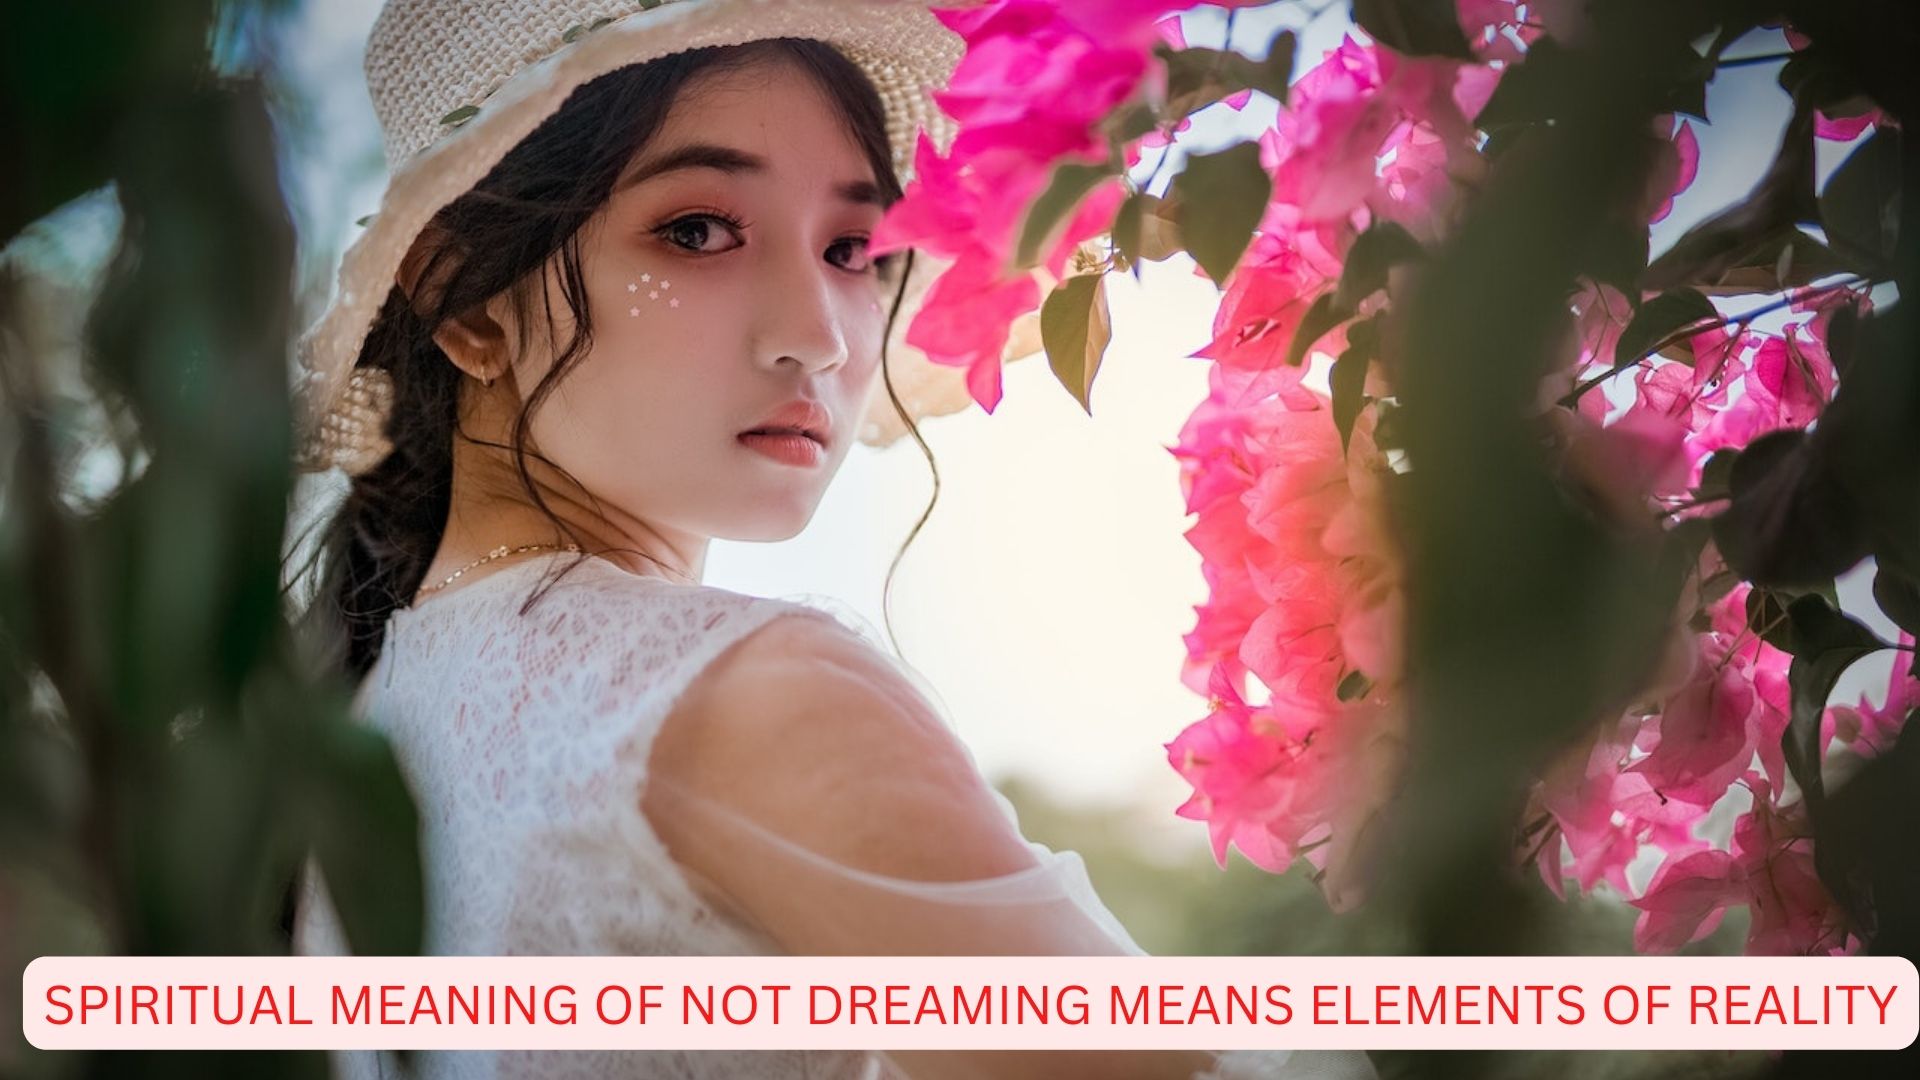 Spiritual Meaning Of Not Dreaming - Your Mind Is Free Of Hidden Desires